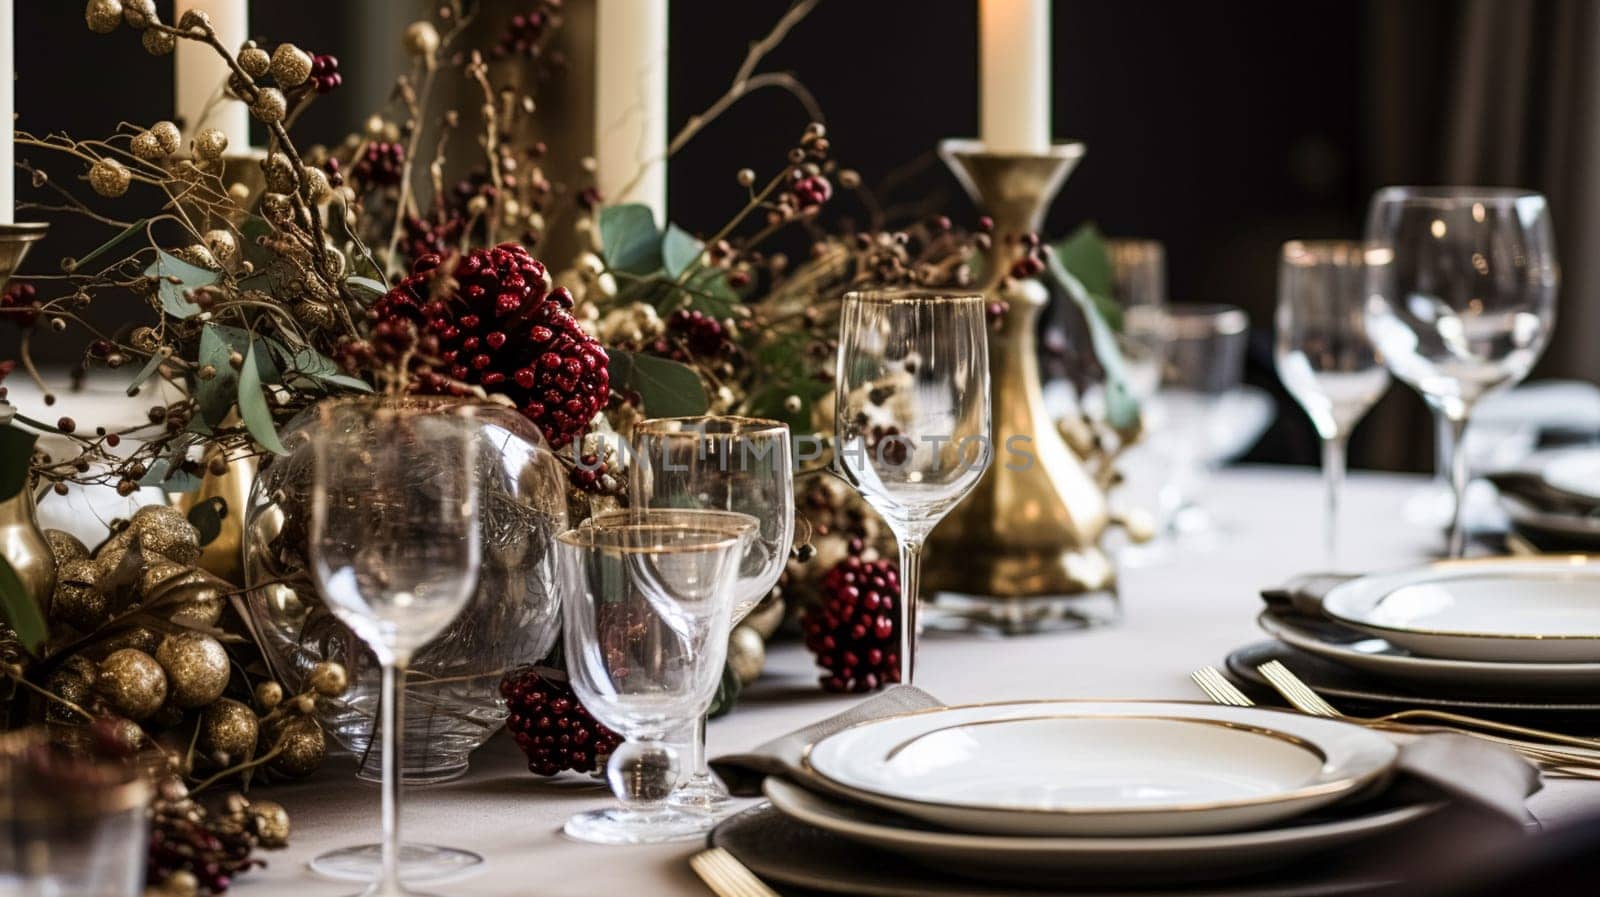 Holiday table decor, Christmas holidays celebration, tablescape and dinner table setting, English country decoration and home styling inspiration